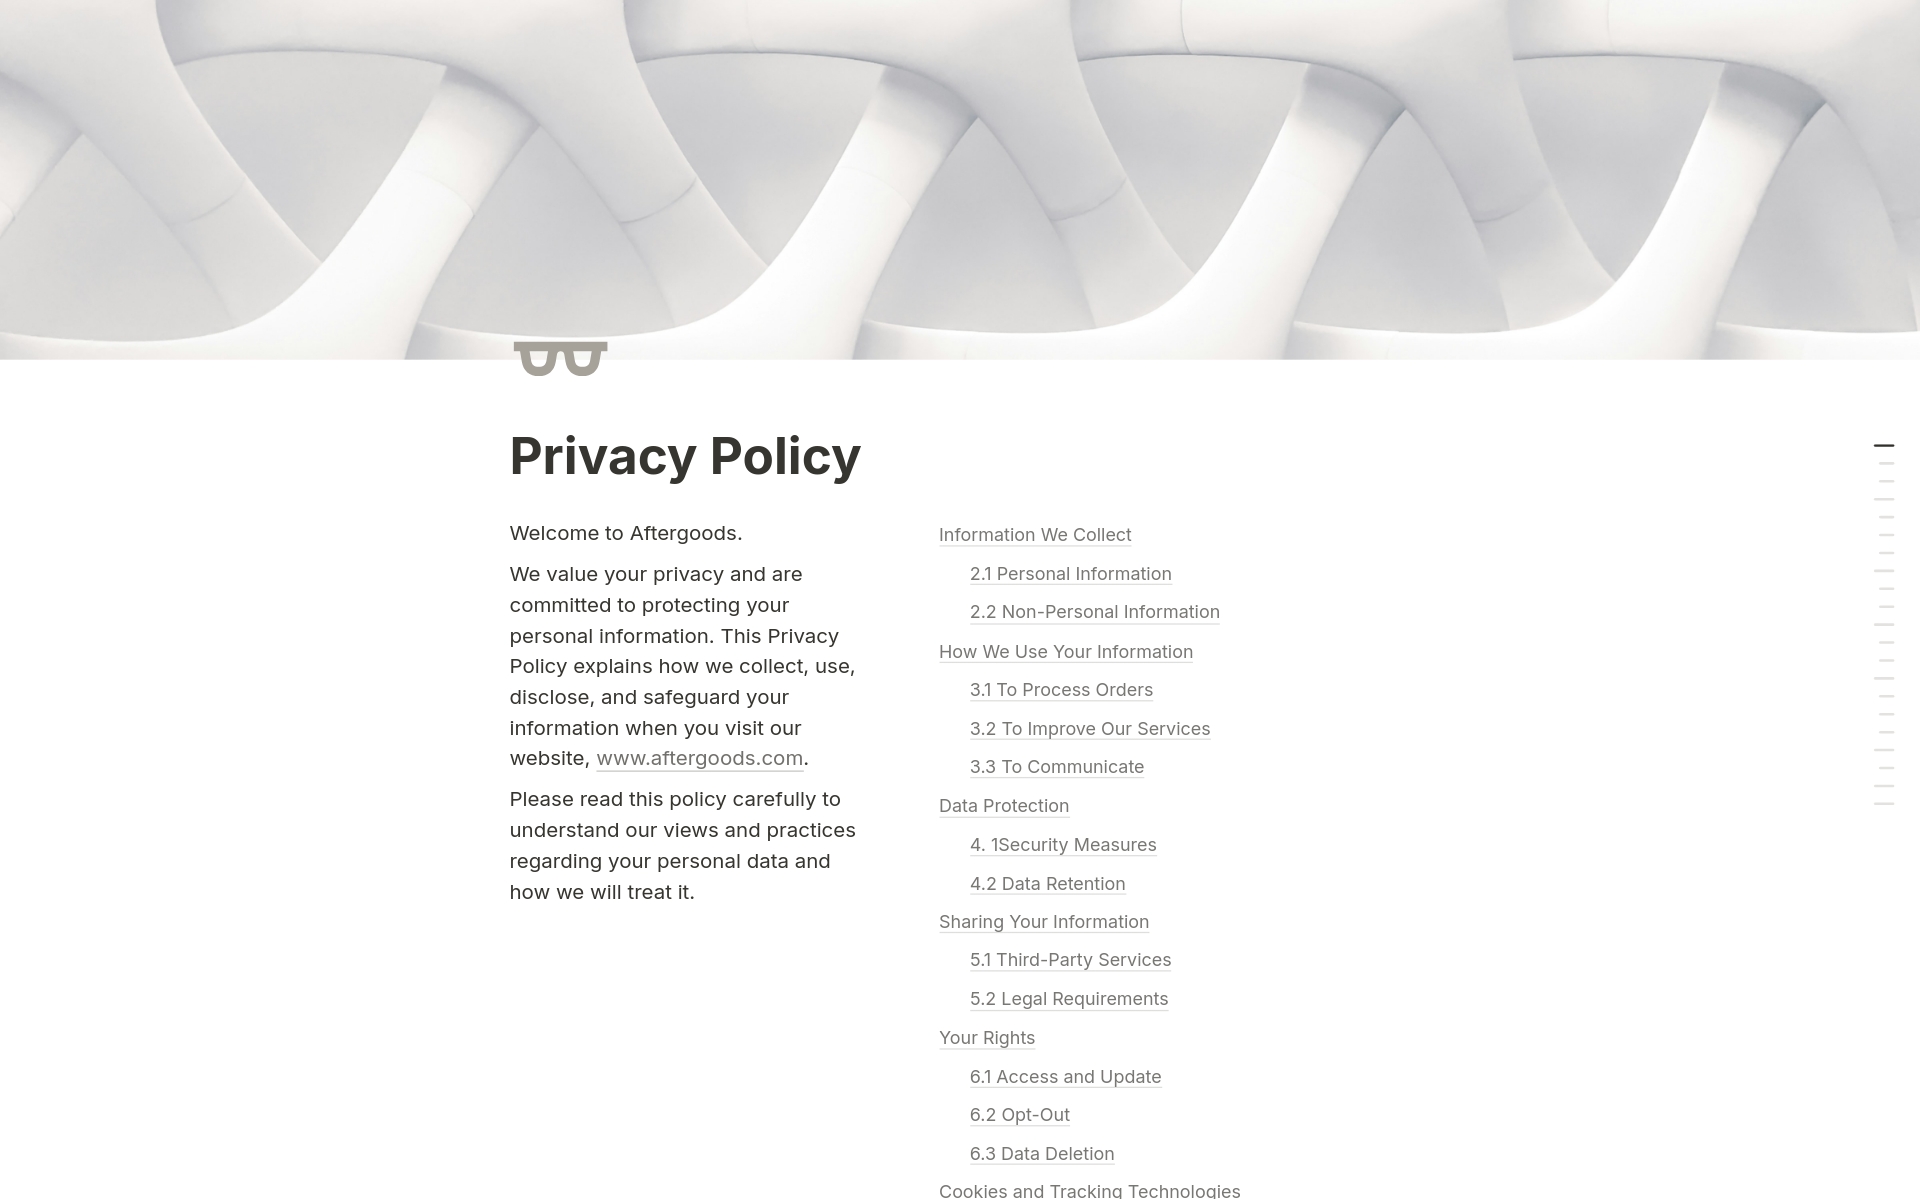 A comprehensive privacy policy template to inform users about data collection and protection practices.
